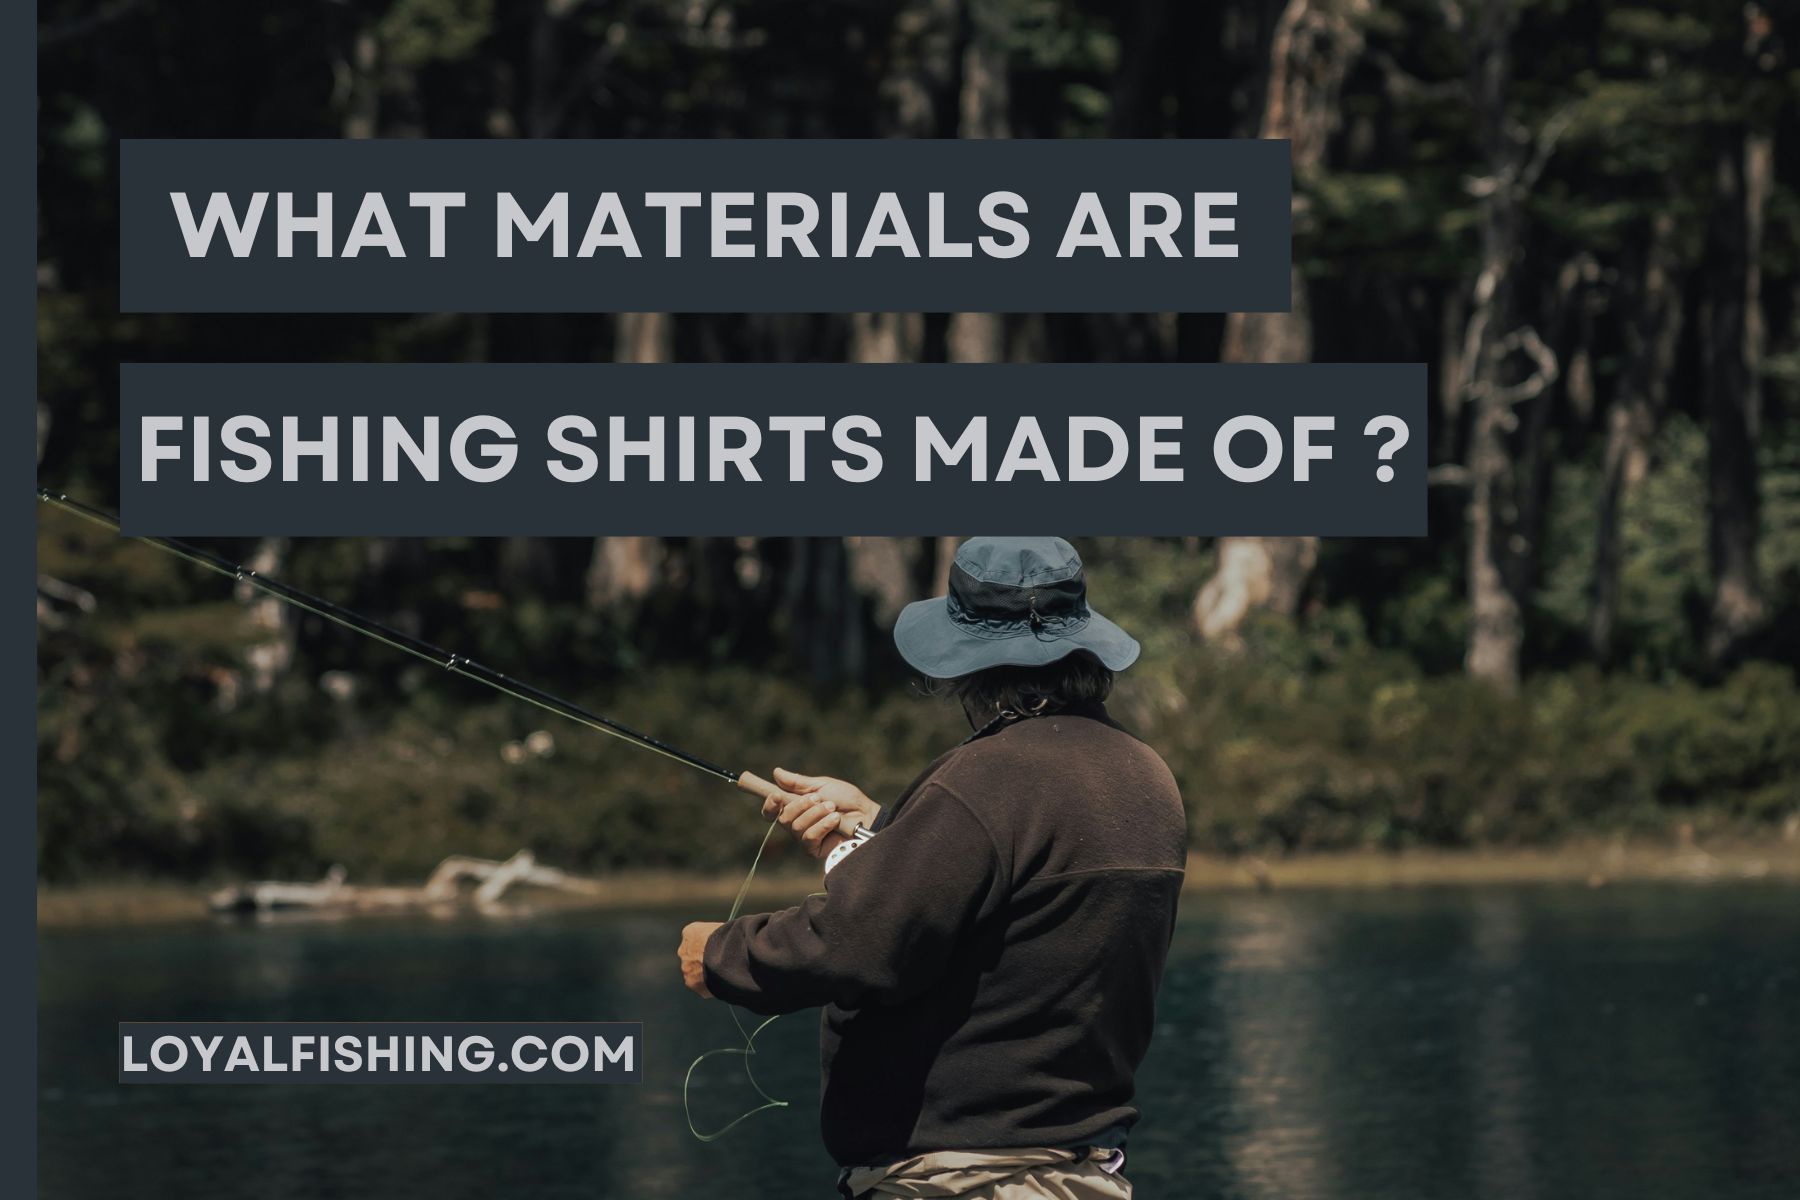 WHAT MATERIALS ARE FISHING SHIRTS MADE OF